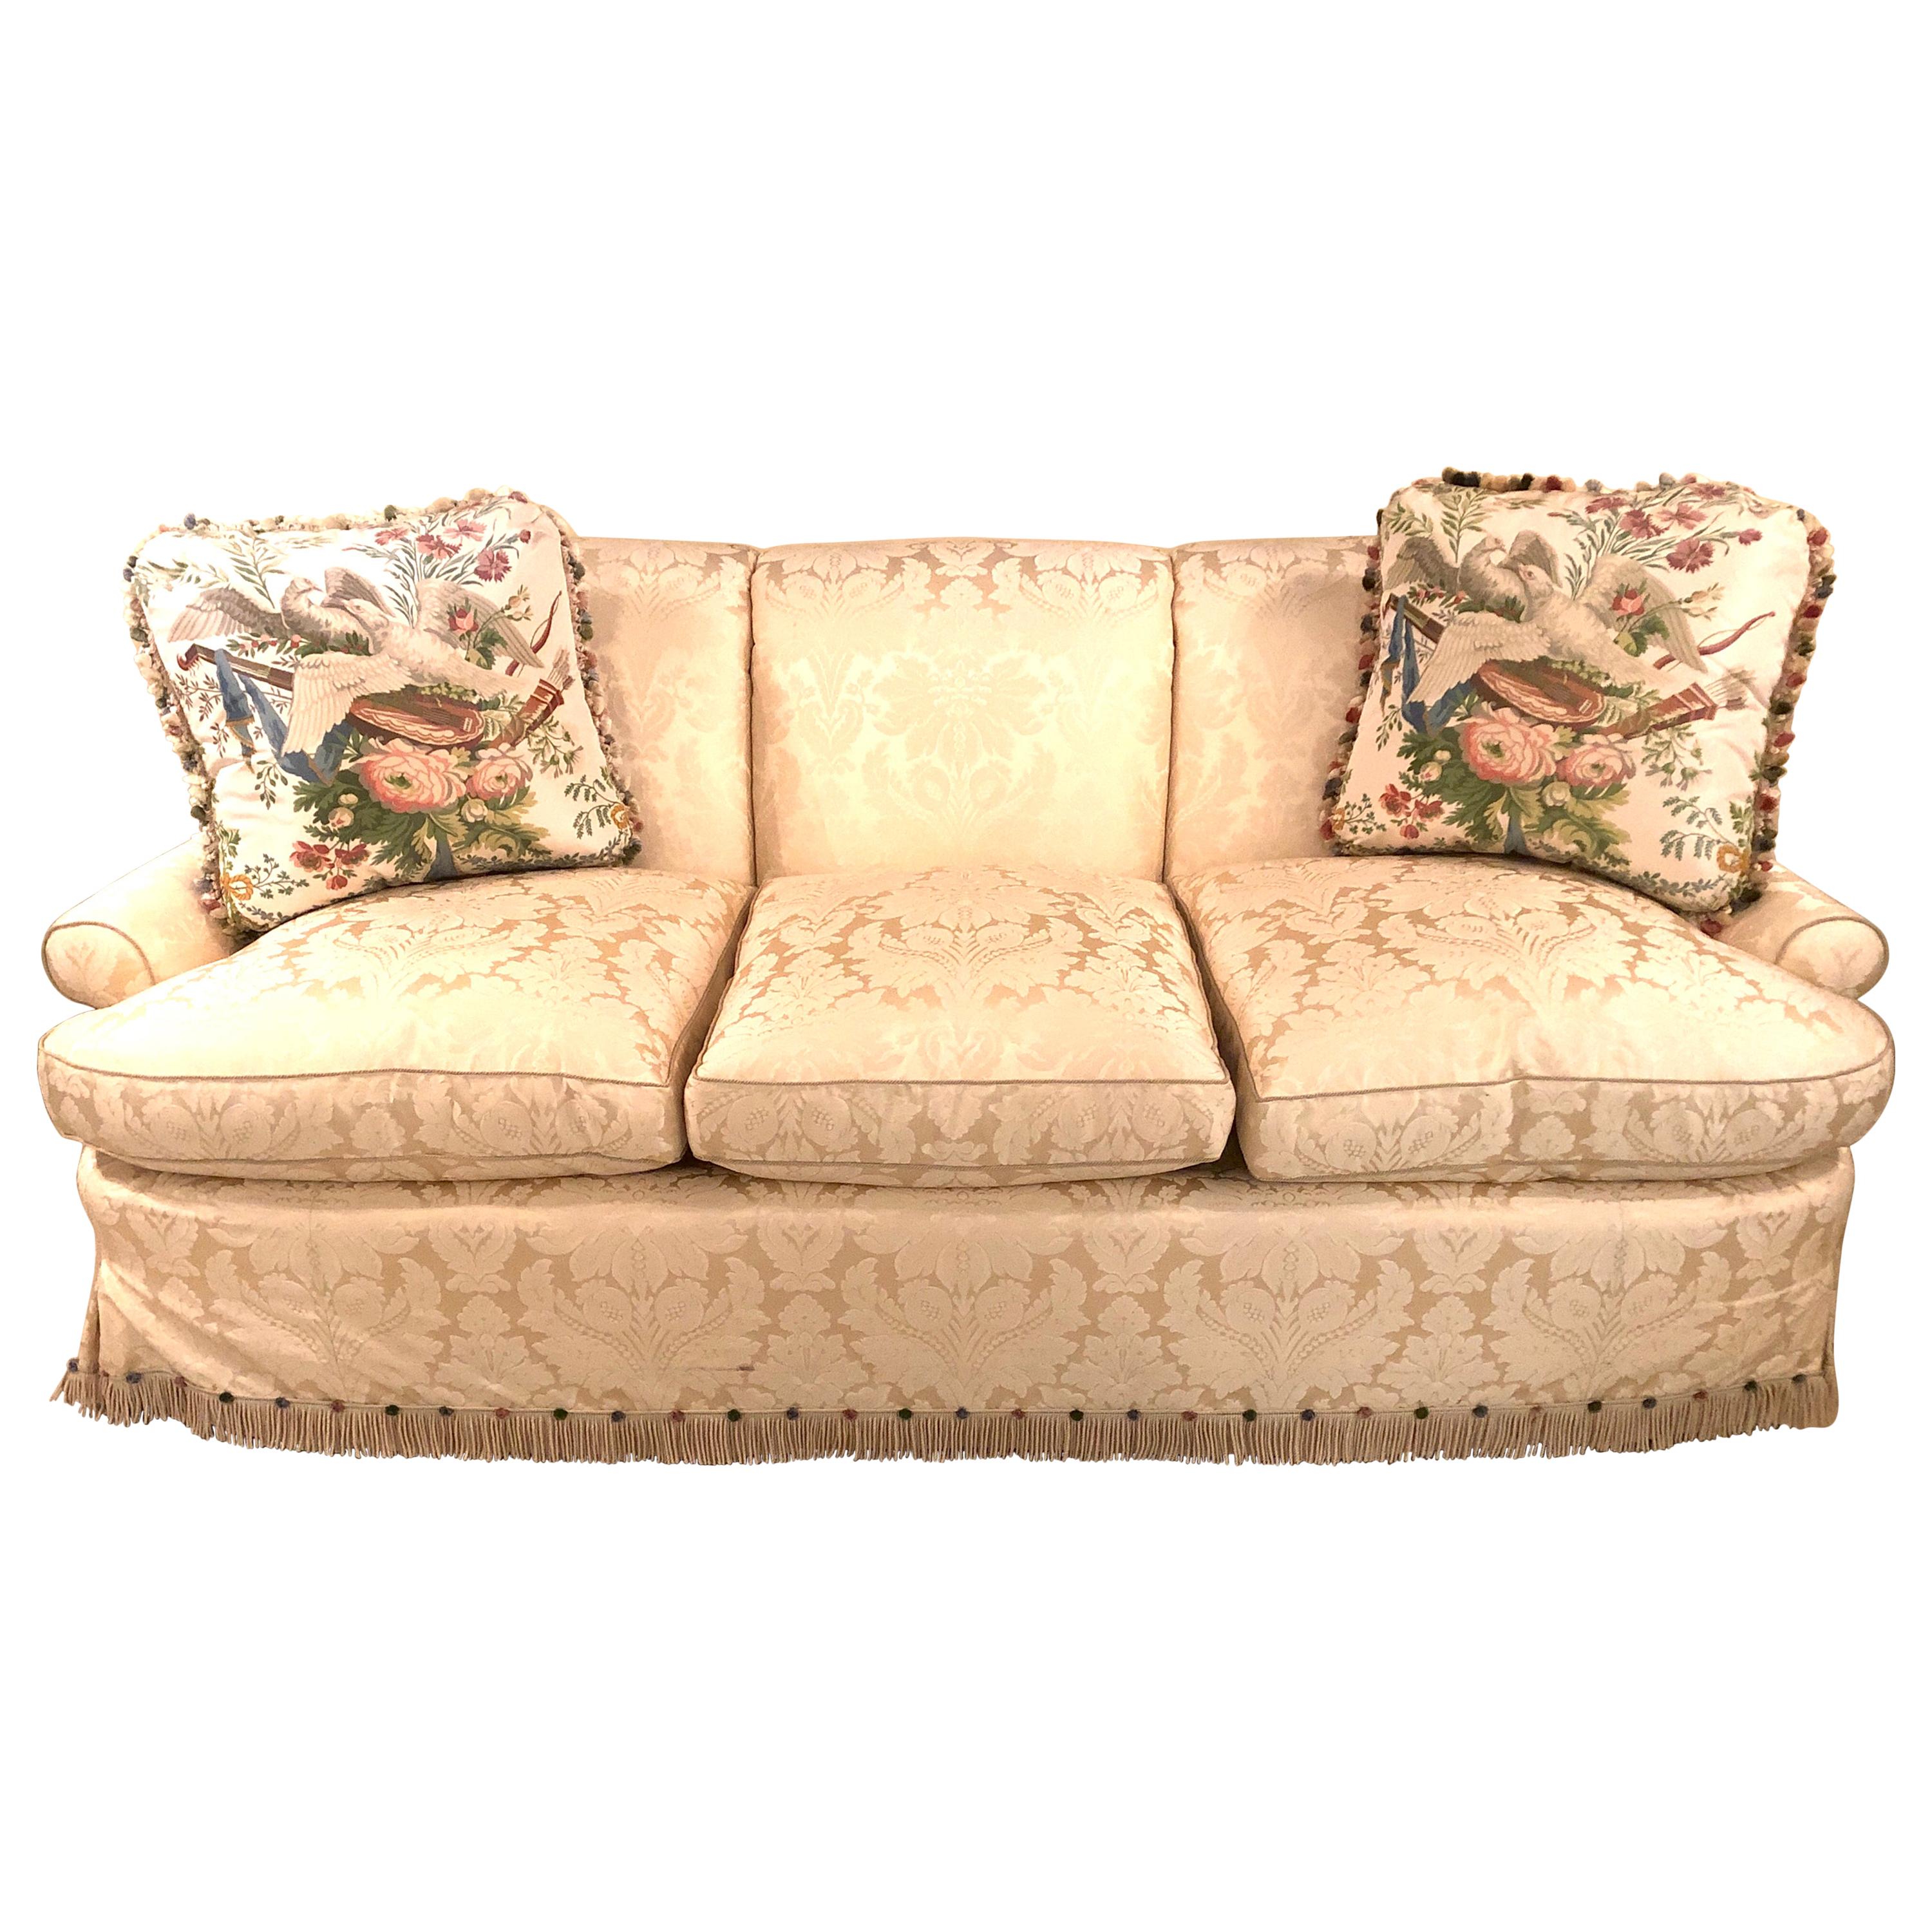 Damask Finely Upholstered Couch or Sofa Having Two Custom Cushions